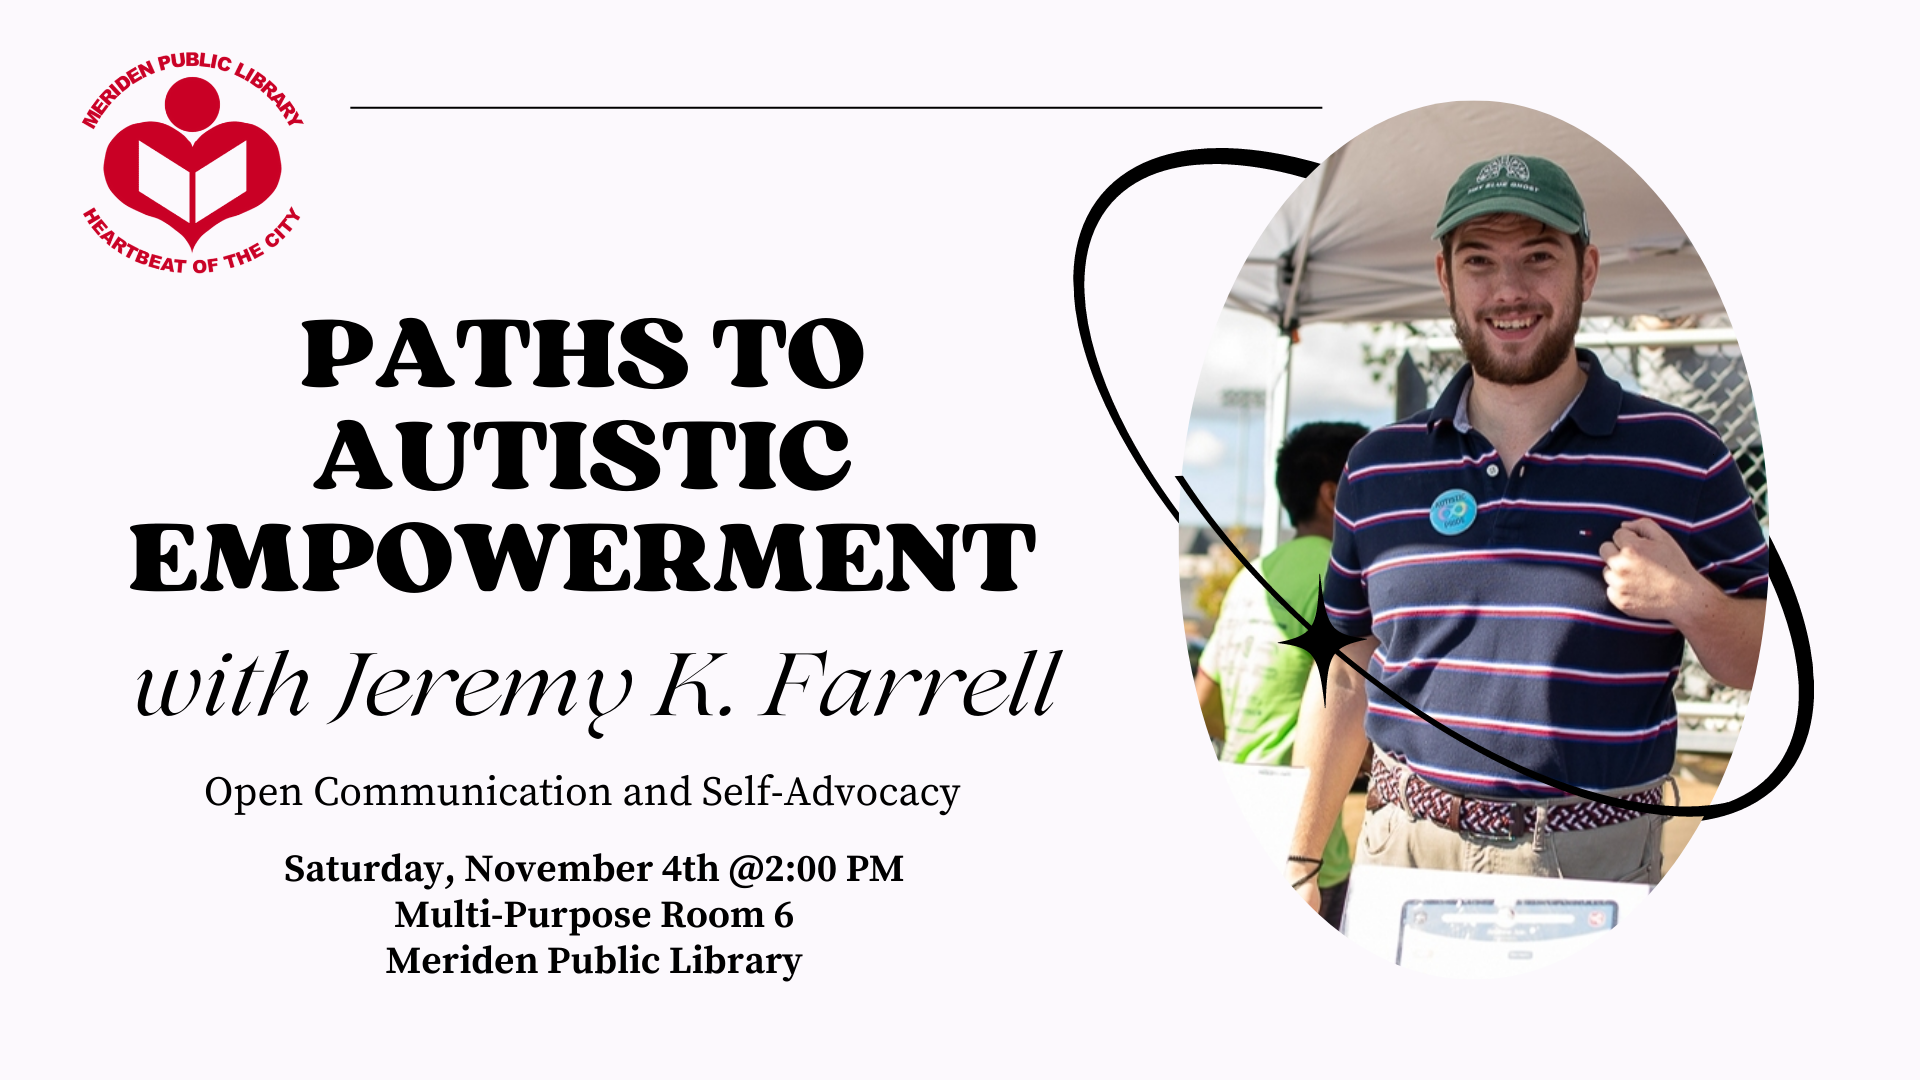 Jeremy K. Farrell is smiling in a circular picture frame against a white background with the Meriden Public Library logo sitting in the top left corner